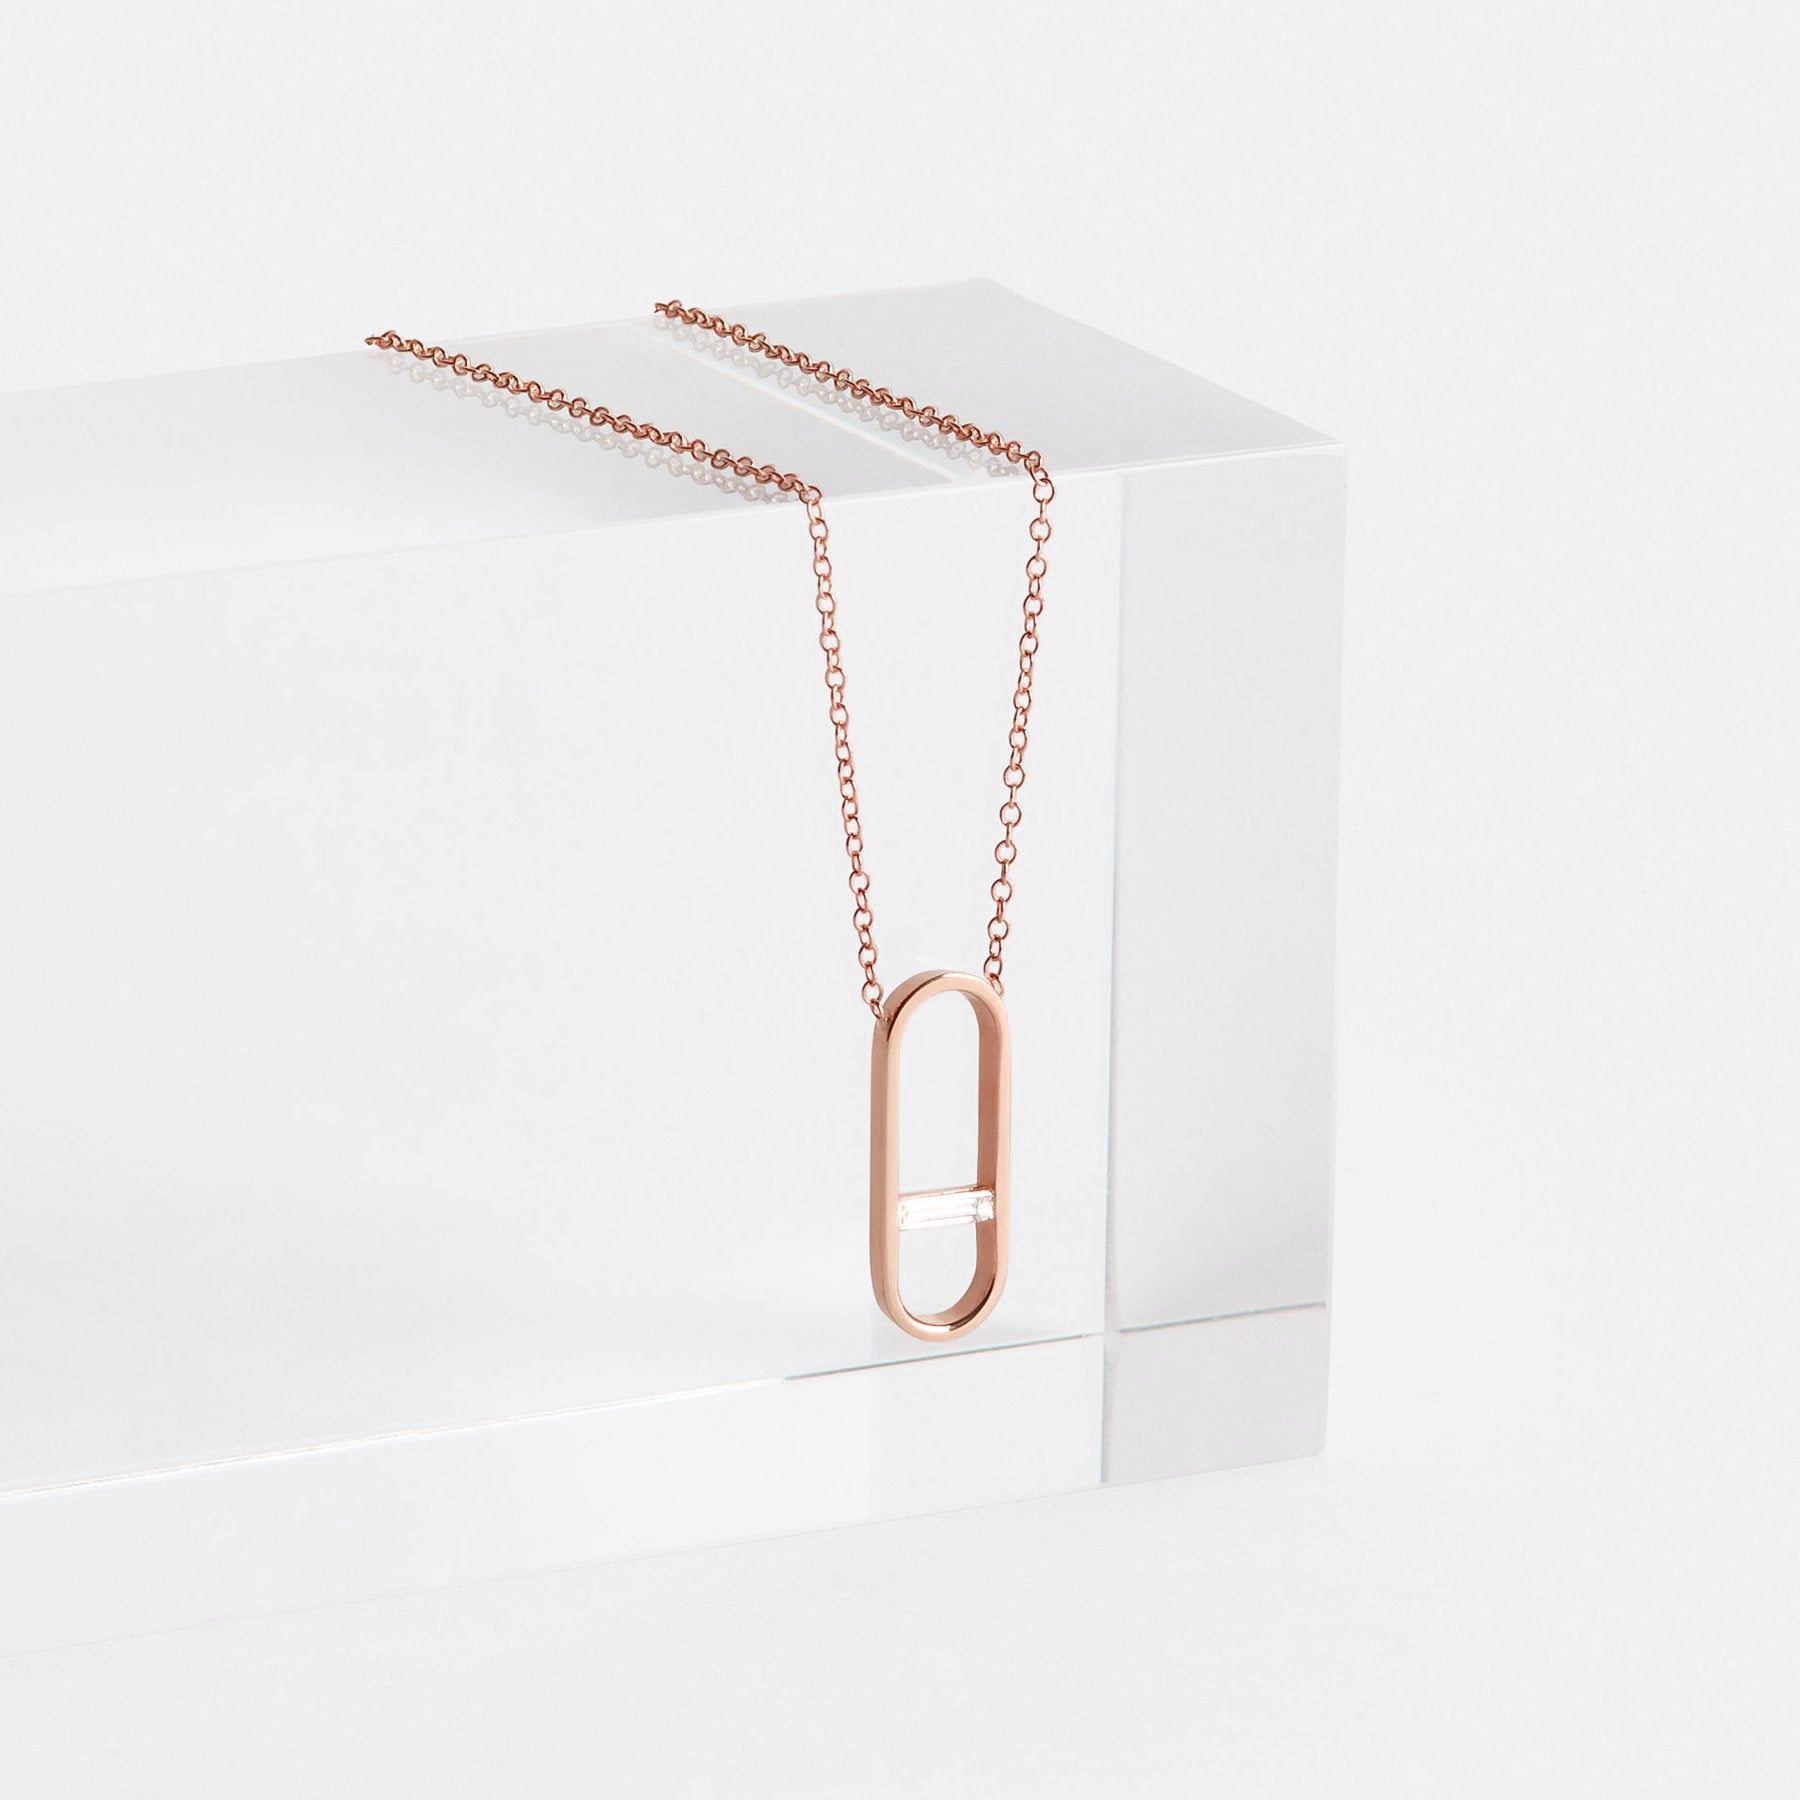 Ranga Unique Necklace in 14k Rose Gold set with White Baguette Diamond By SHW Fine Jewelry NYC